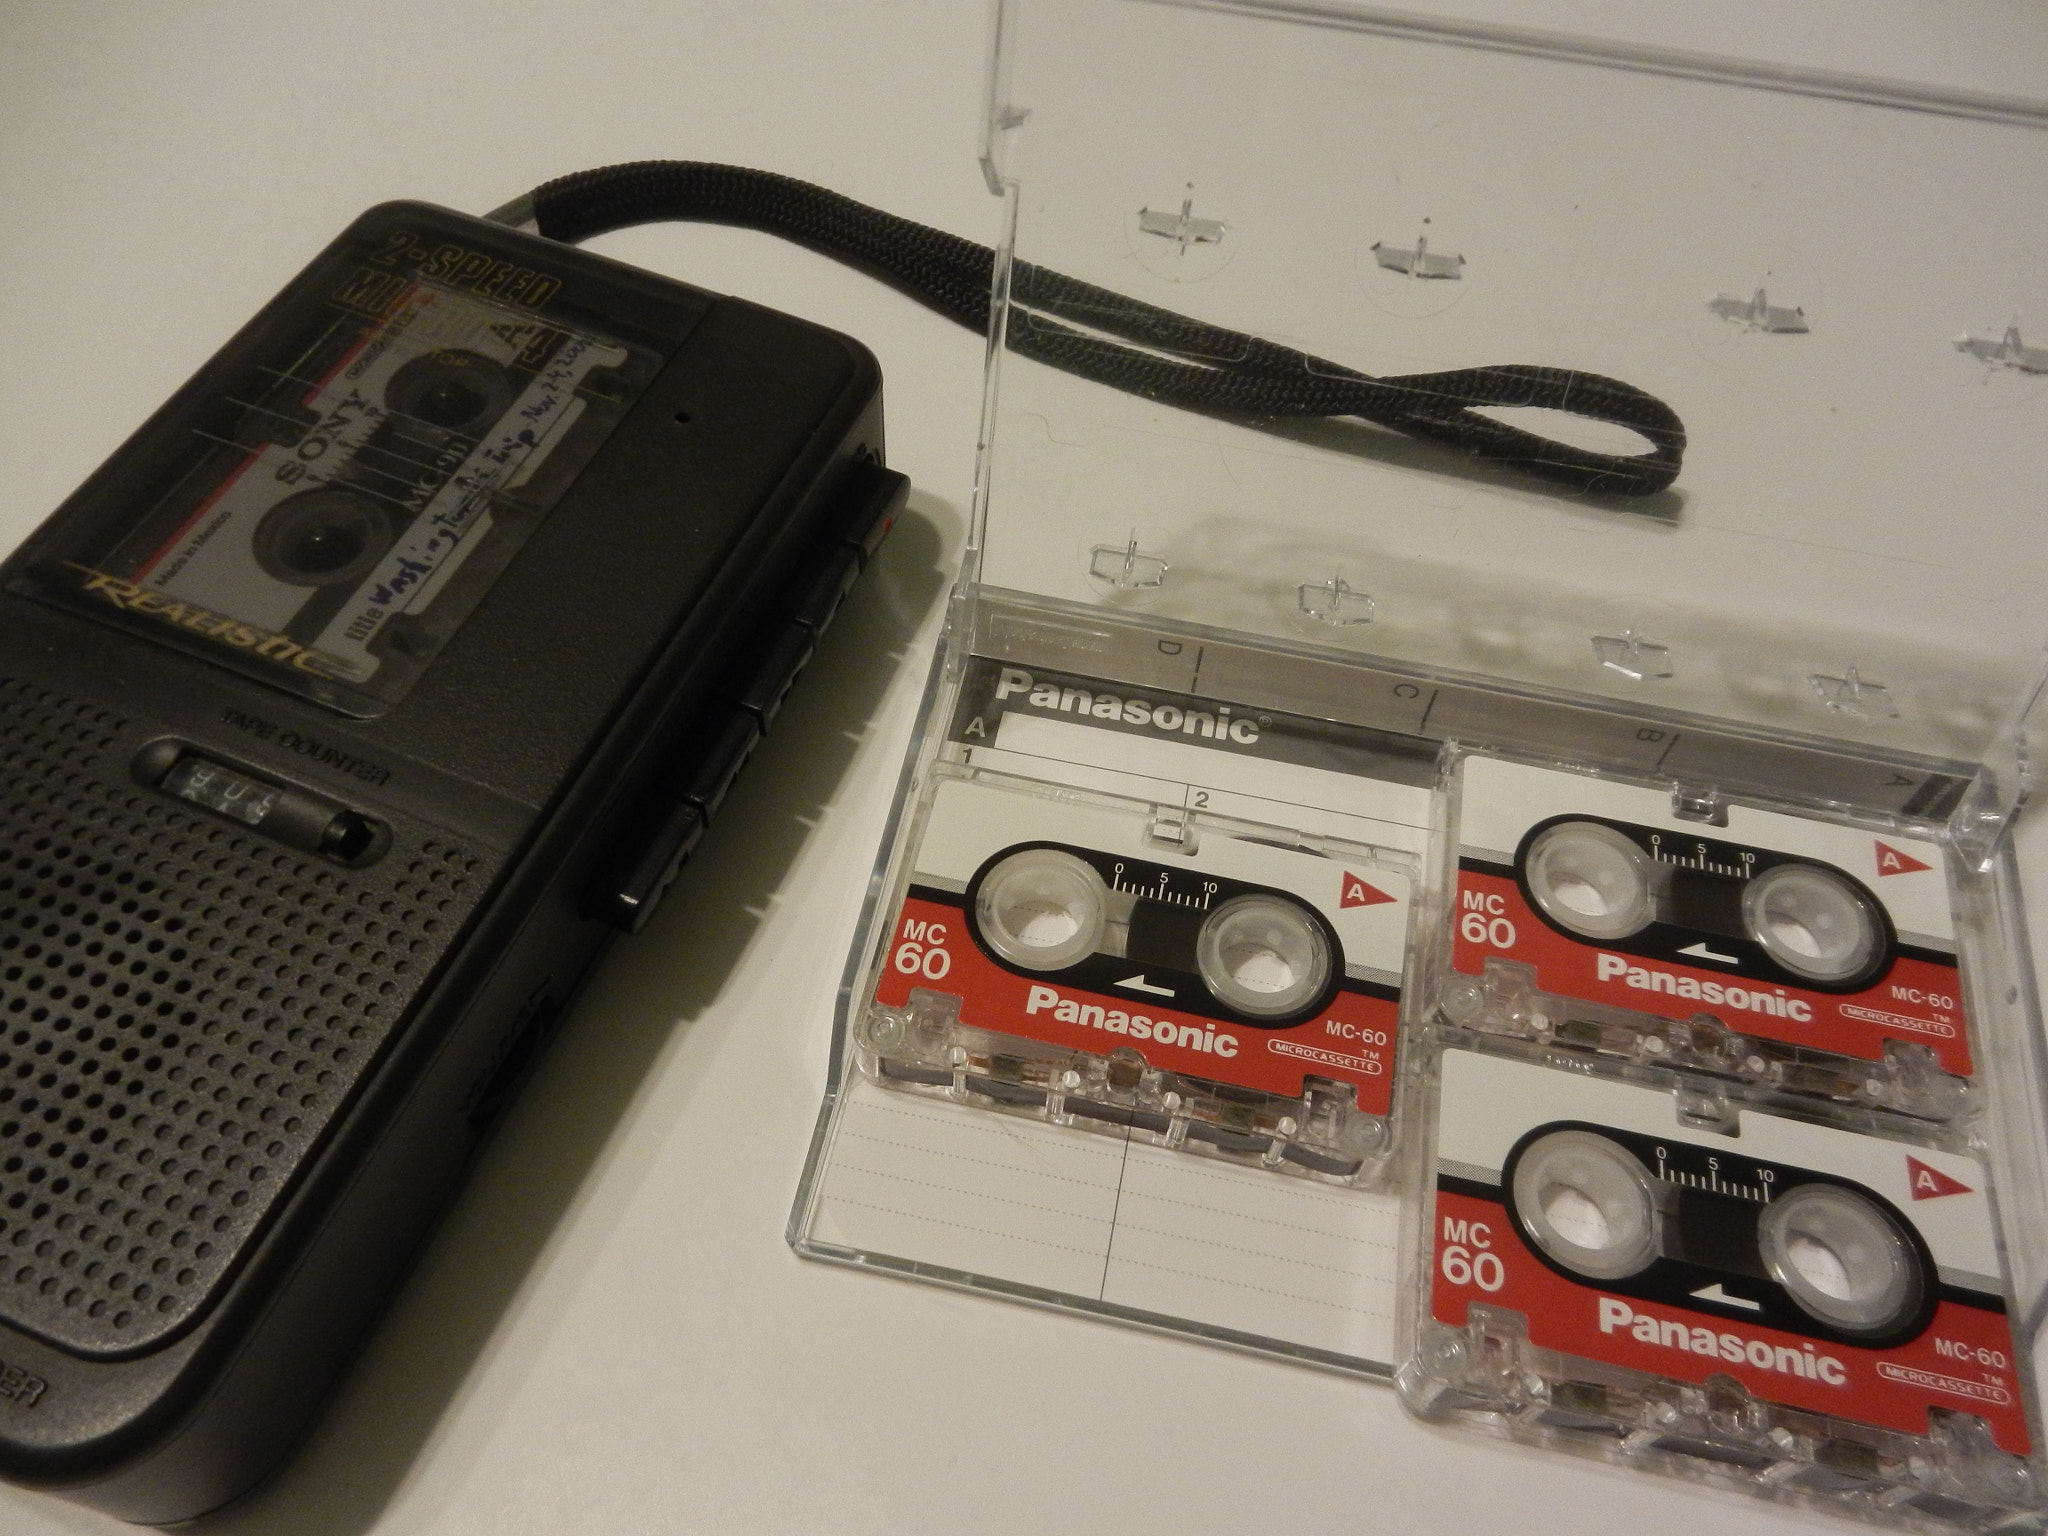 Nikon Coolpix S800c sample photo. Microcassette recorder and tape photography